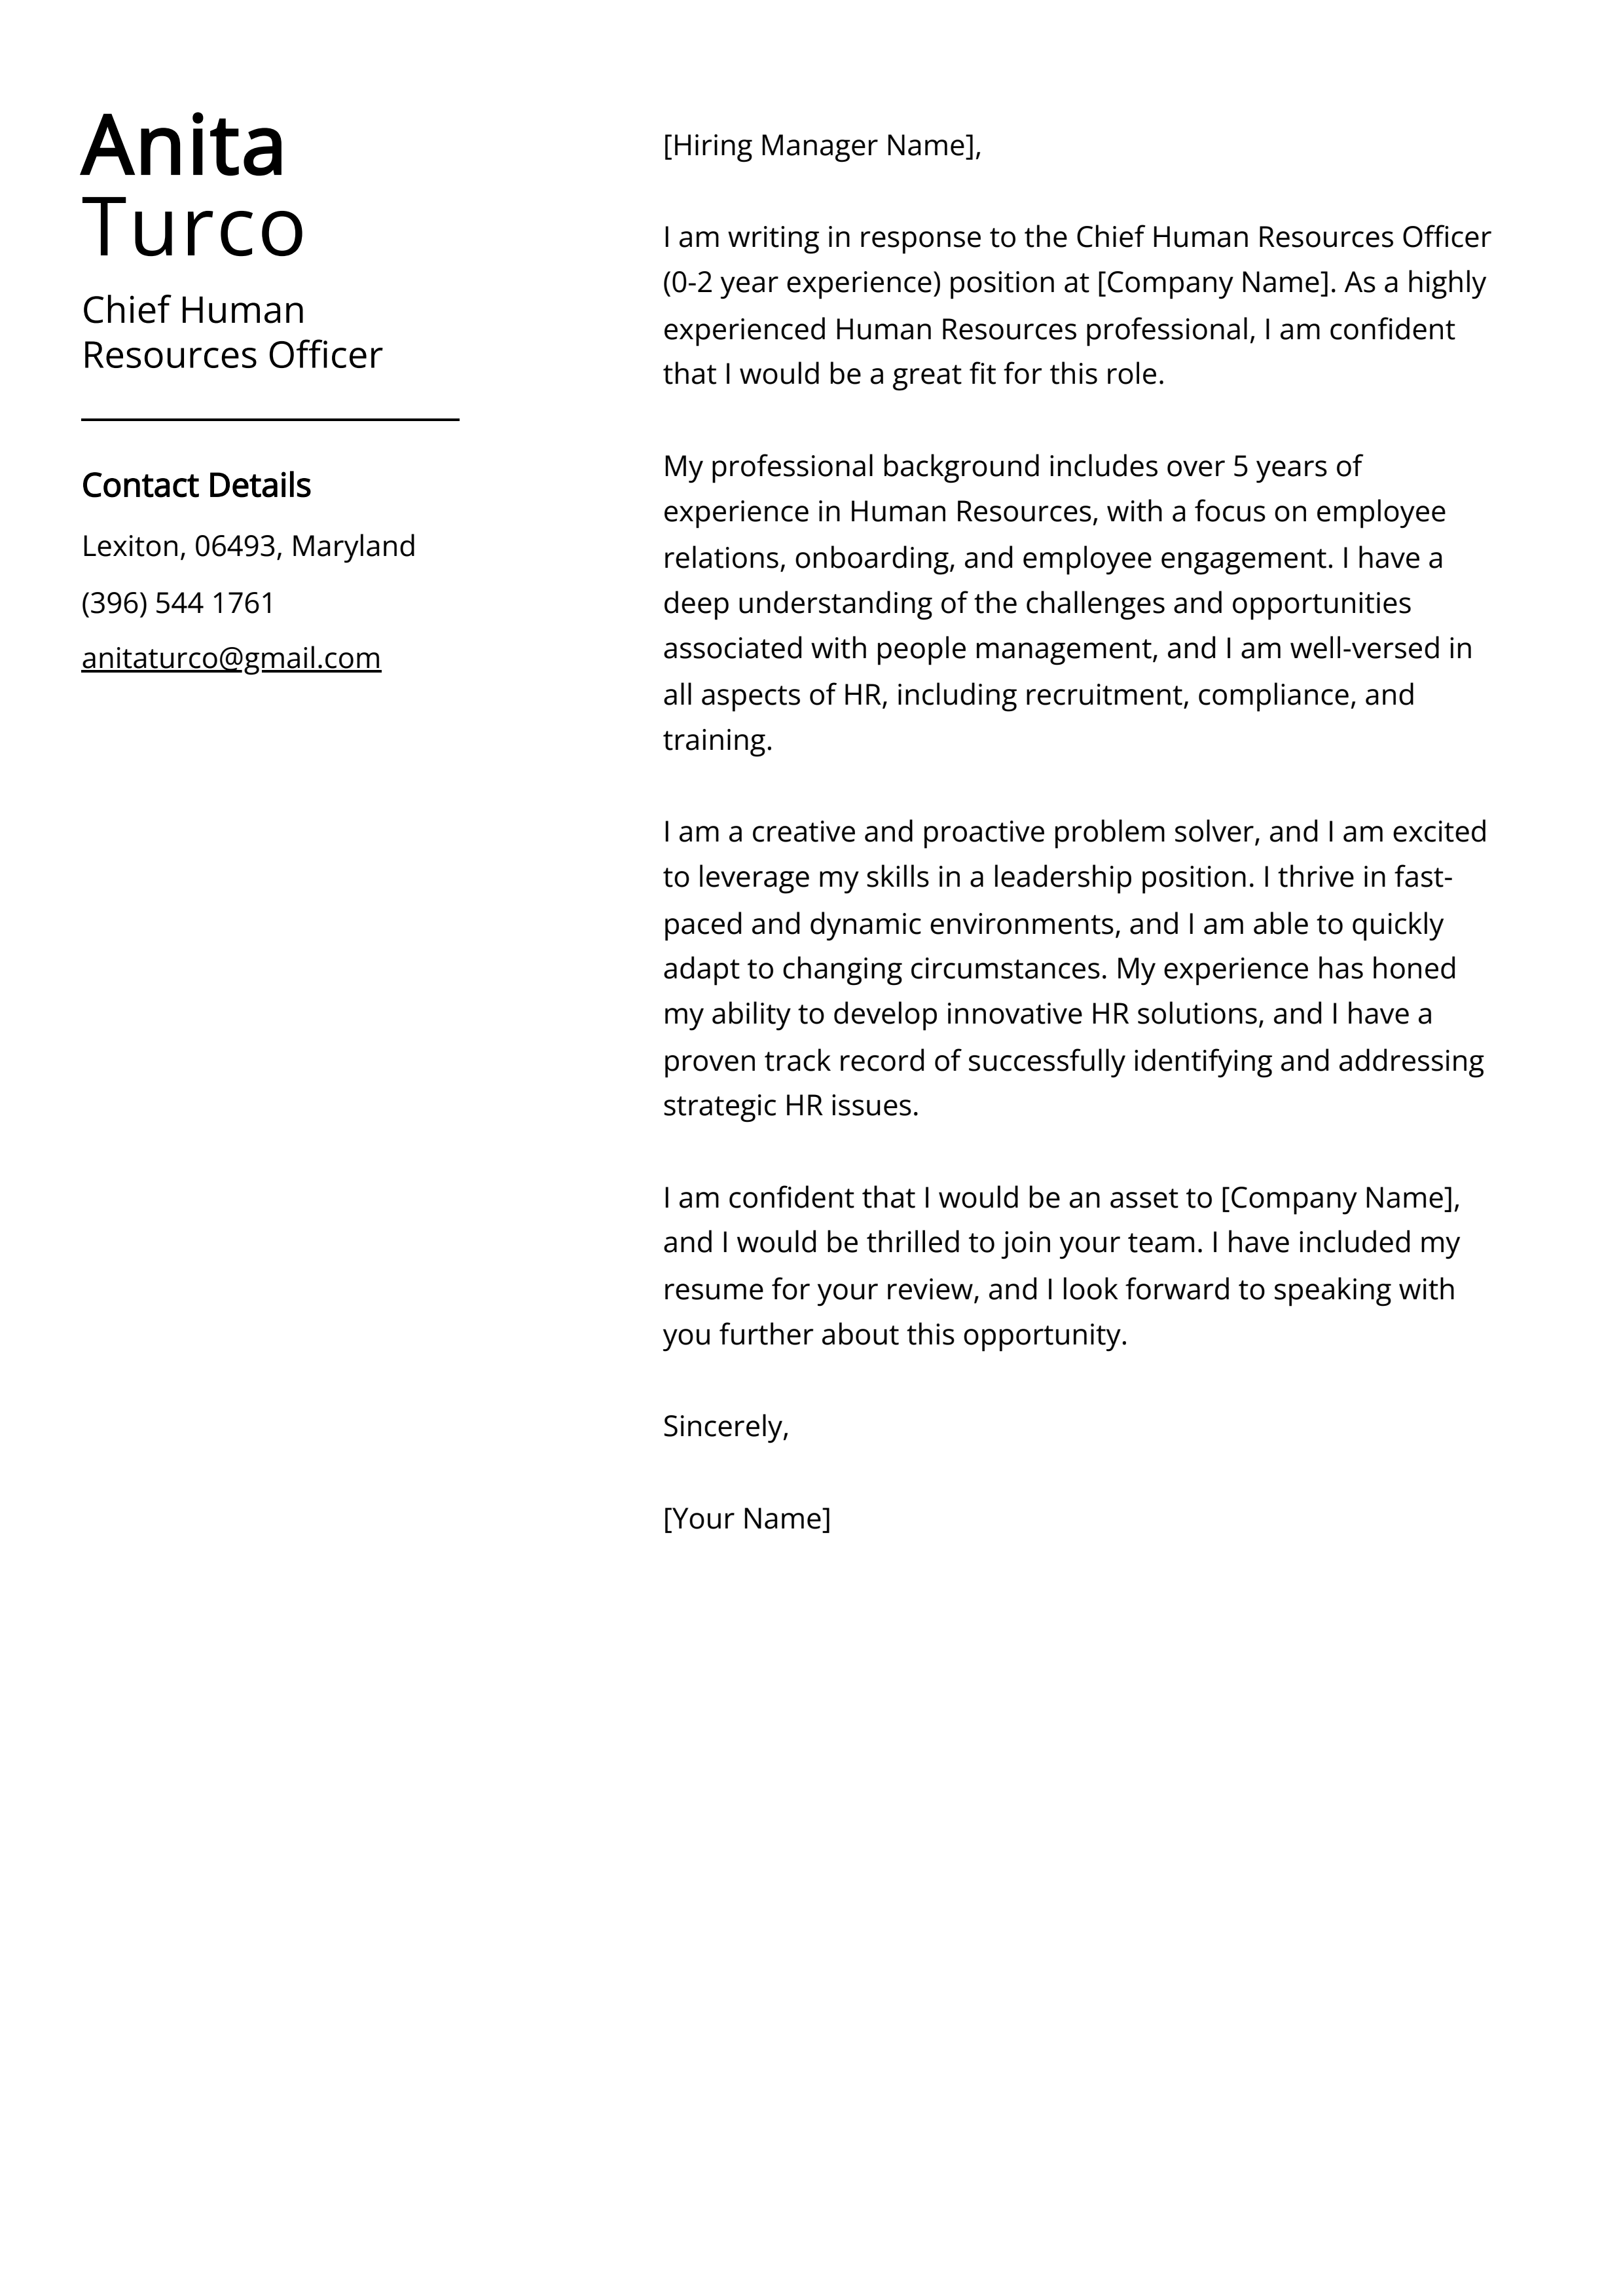 Chief Human Resources Officer Cover Letter Example